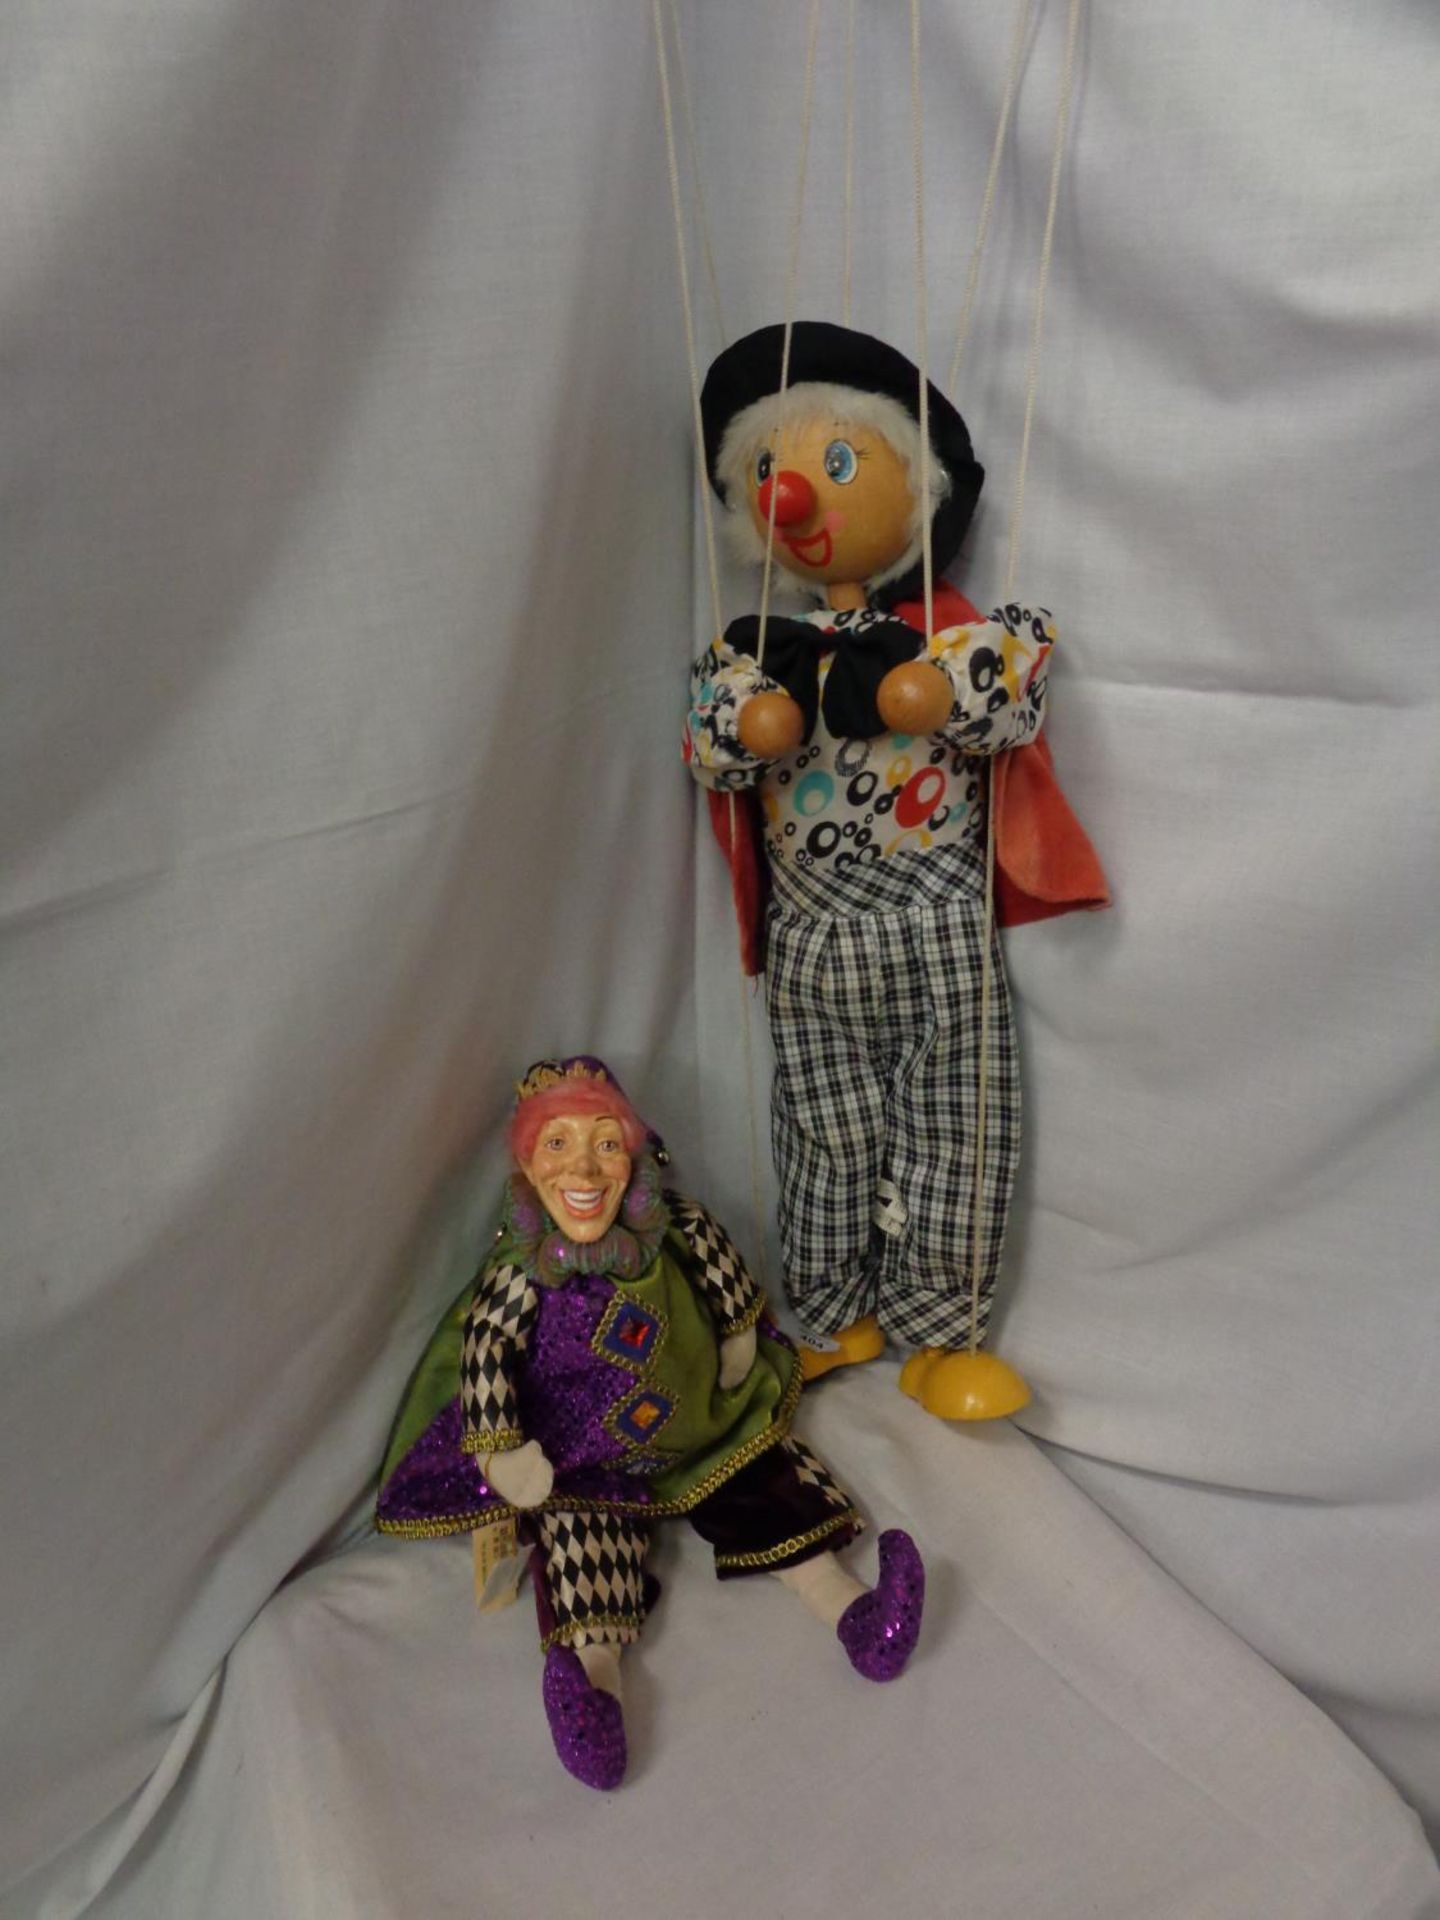 TWO ITEMS TO INCLUDE A HARRODS ELECTRIZZARE ACTOR DOLL WITH LABEL AND A WOODEN CLOWN PUPPET WITH